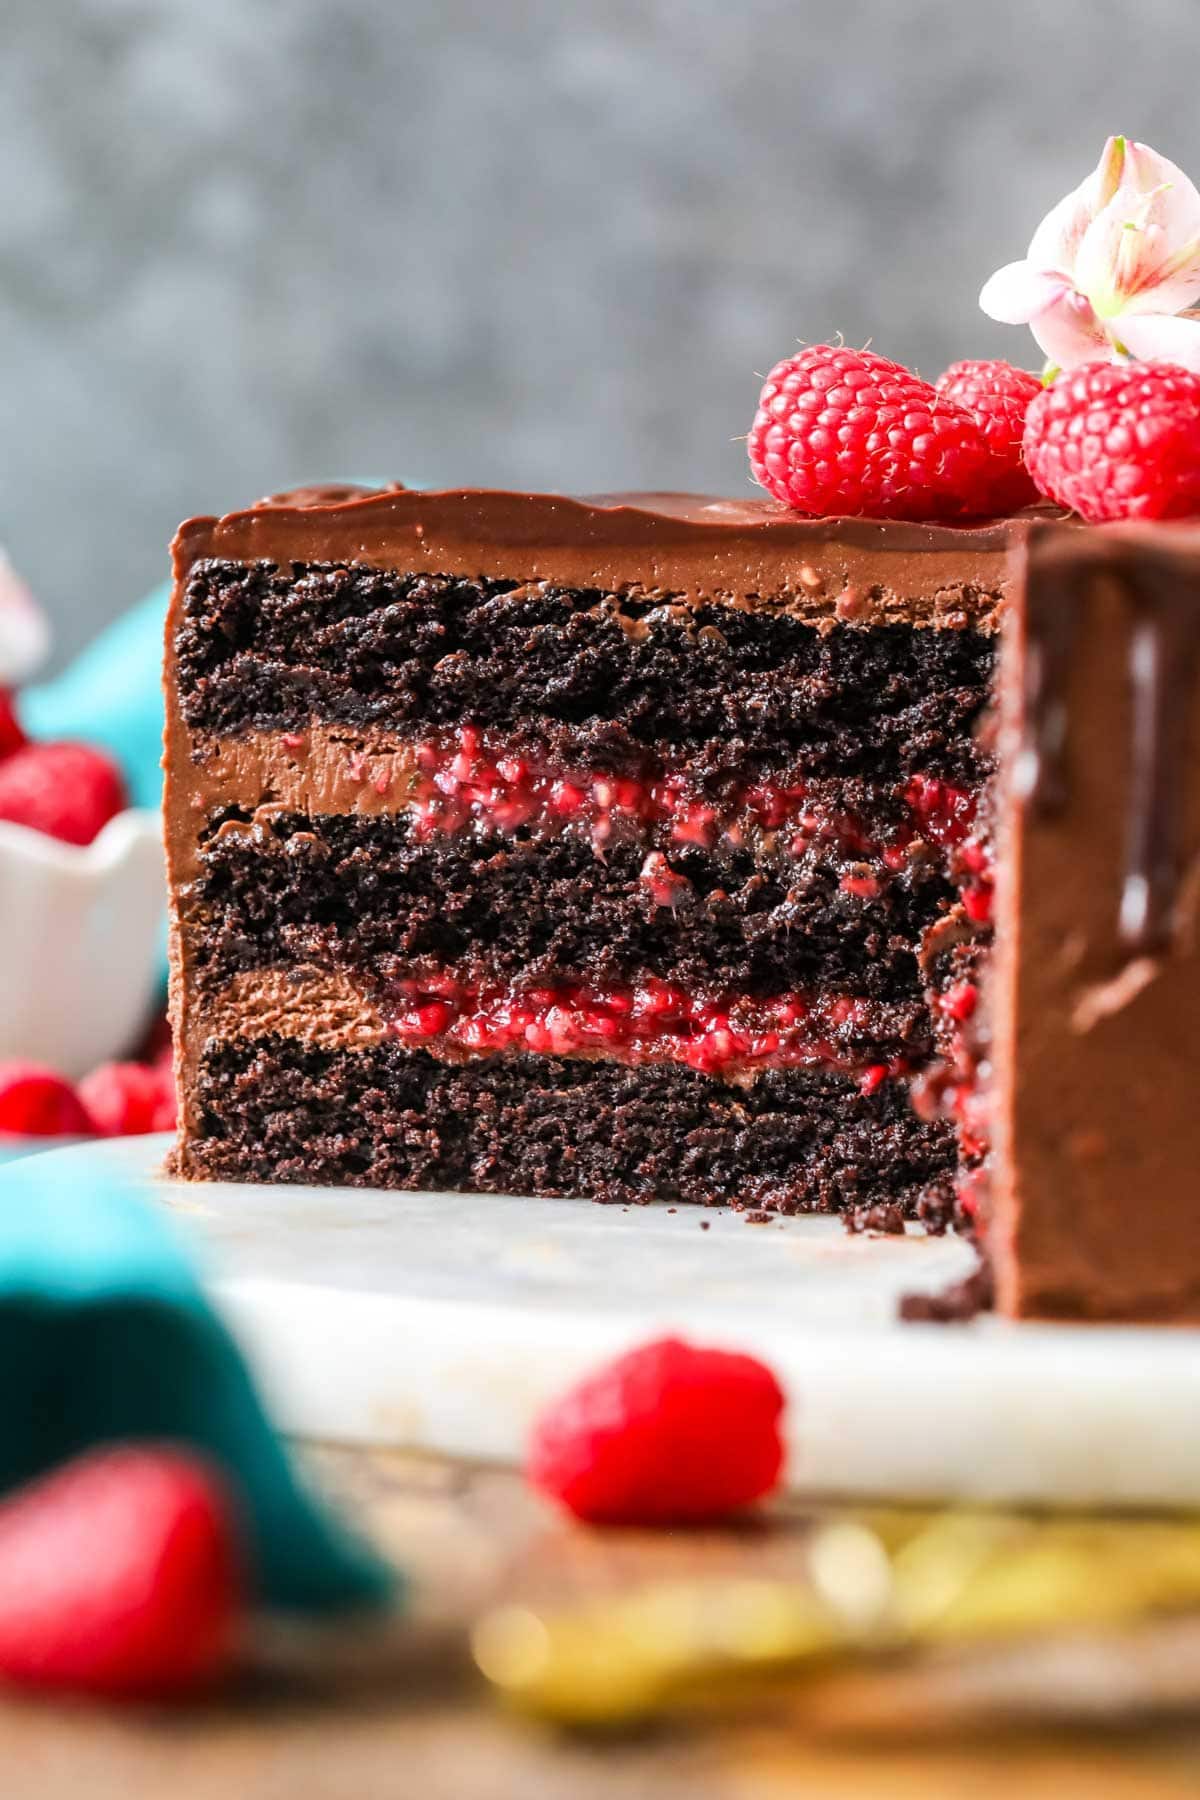 Cross section of a chocolate raspberry cake made with a raspberry filling and chocolate ganache topping.